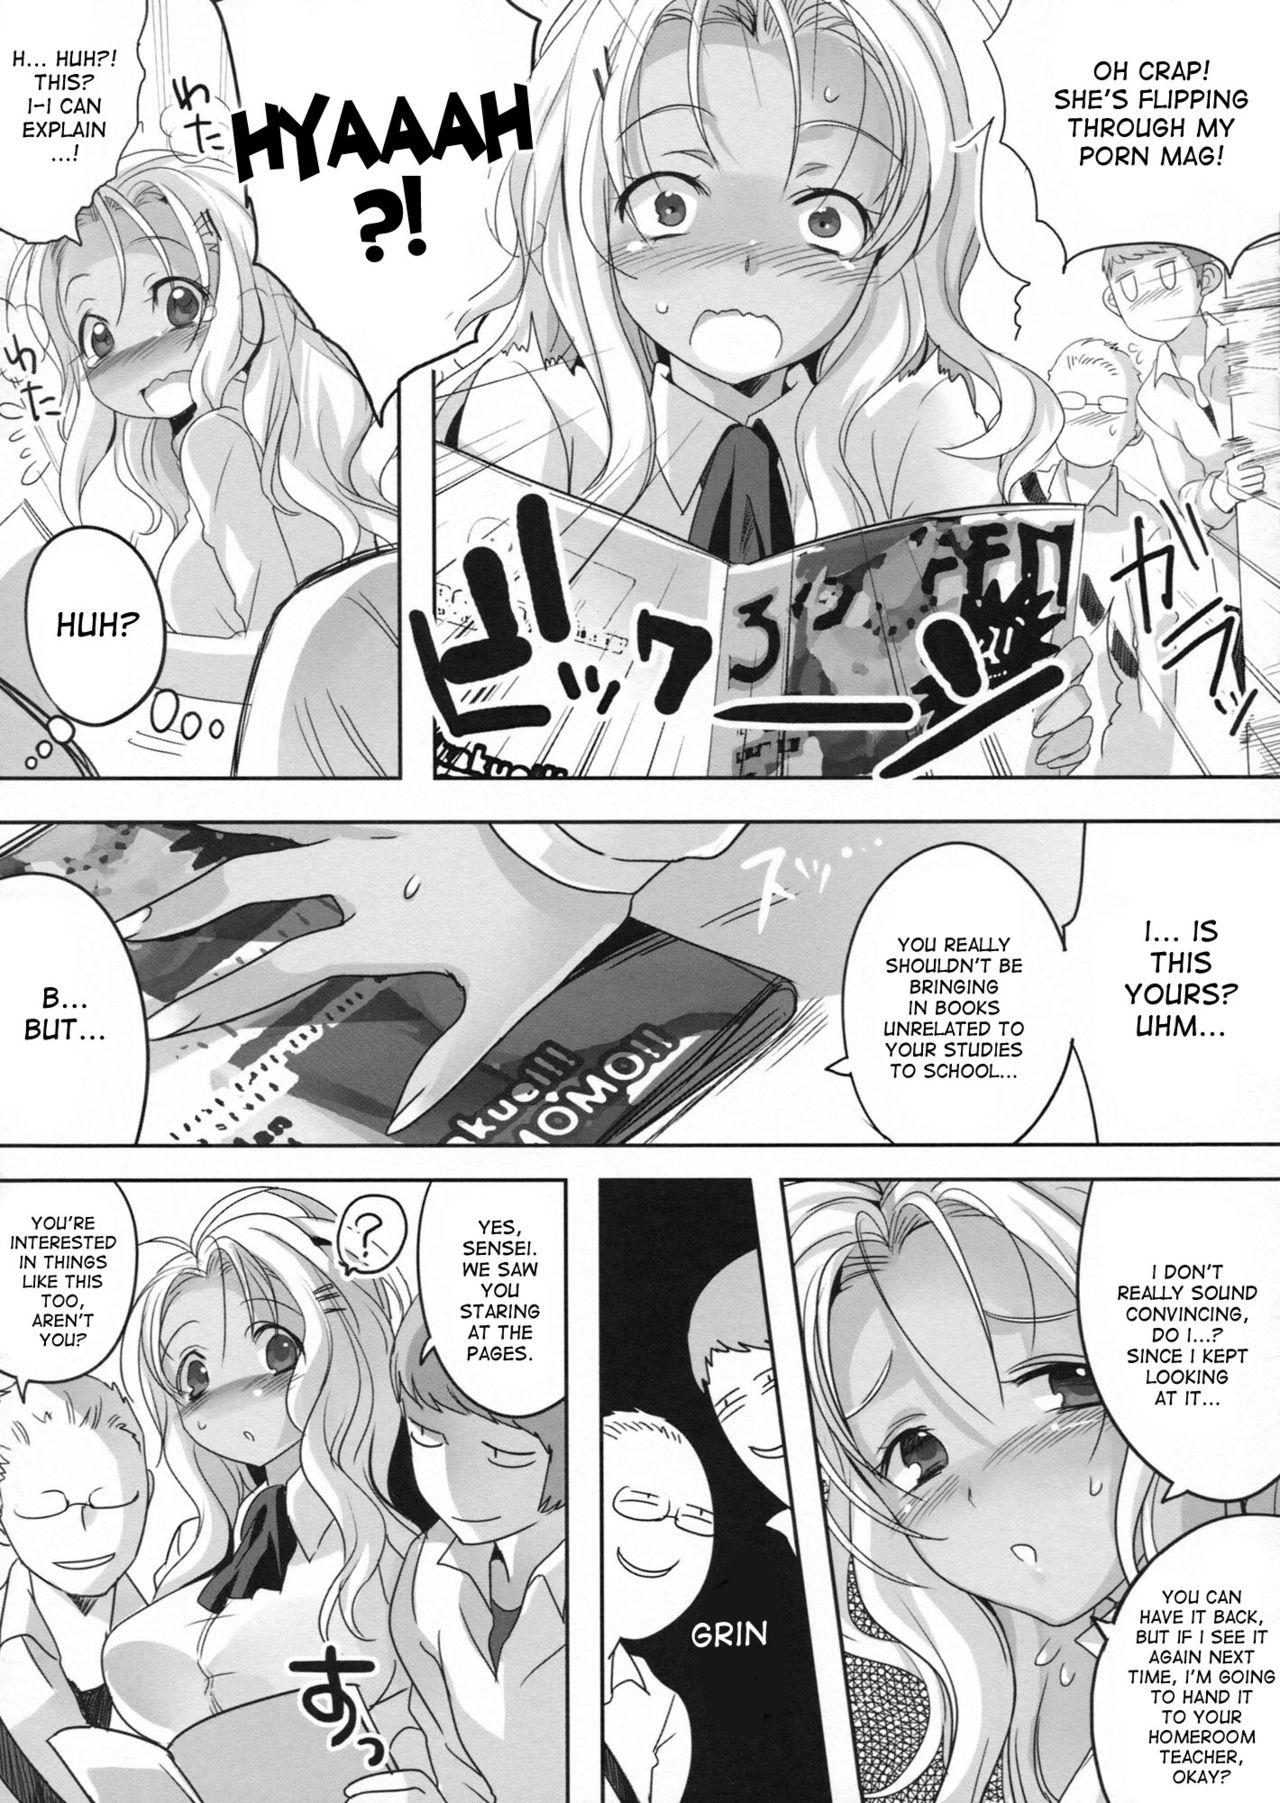 Roleplay (C82) [Maxzheart (Fight Fight Chiharu)] Akogare no Seidorei | The Teacher (Sex Slave) Whom I Admire [English] {doujin-moe.us} - Original Action - Page 6